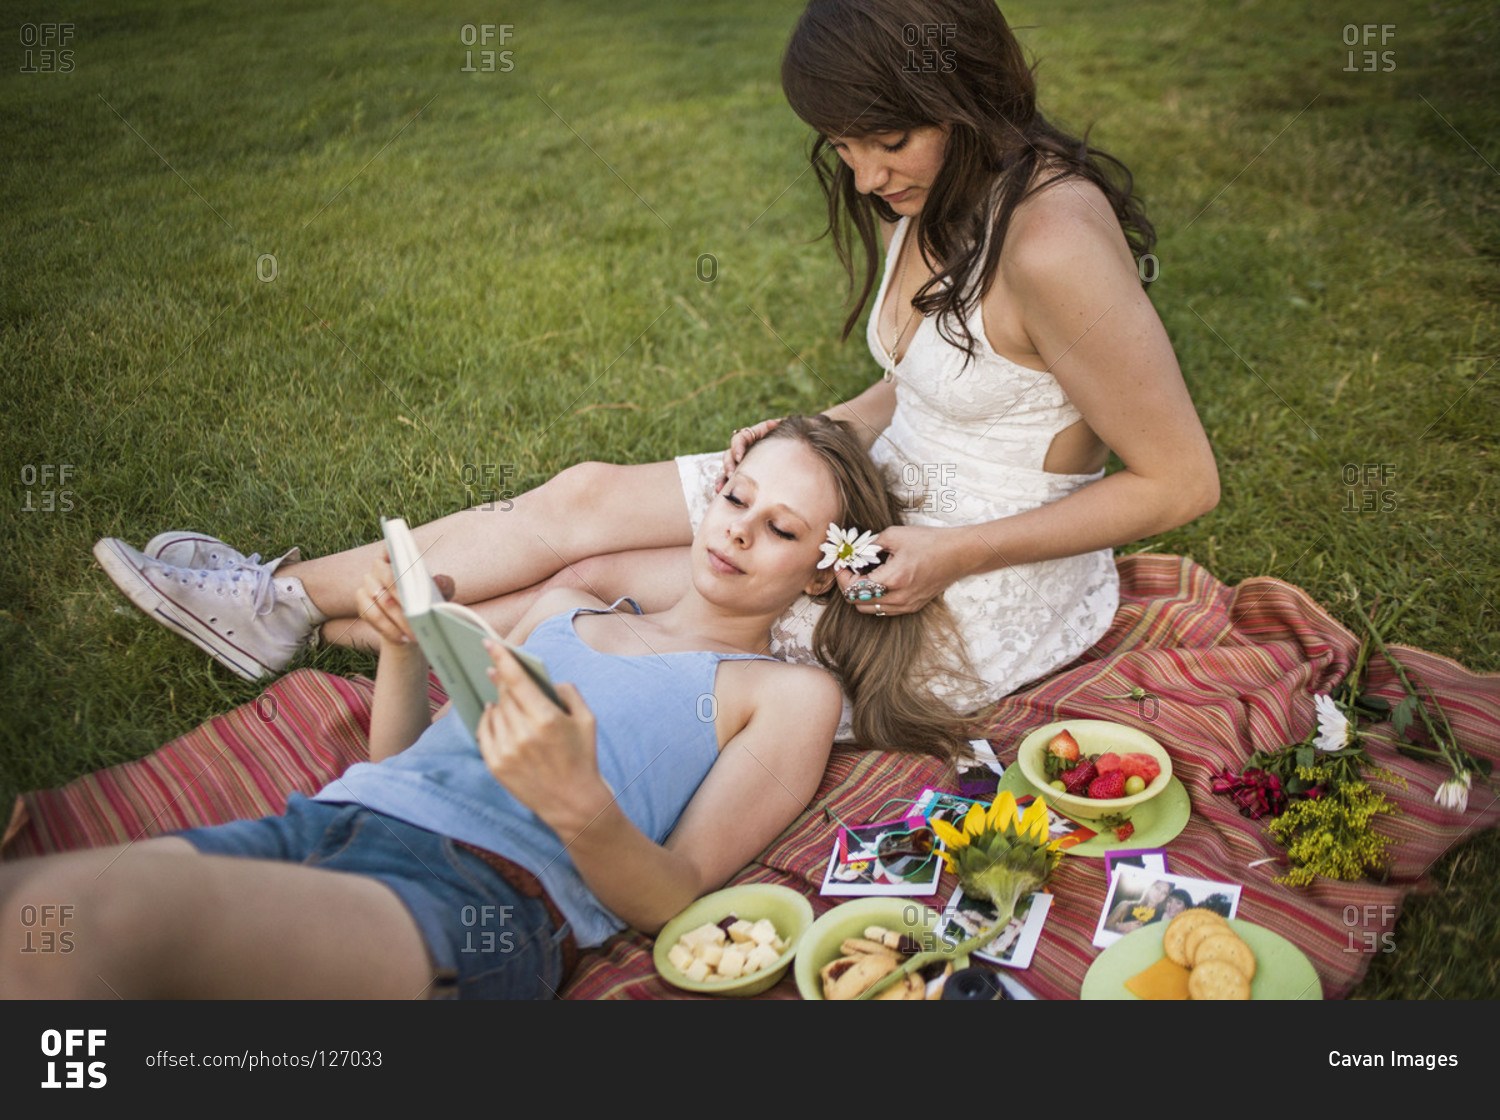 Sex with HIS WIFE AT A PICNIC (76 photos) image